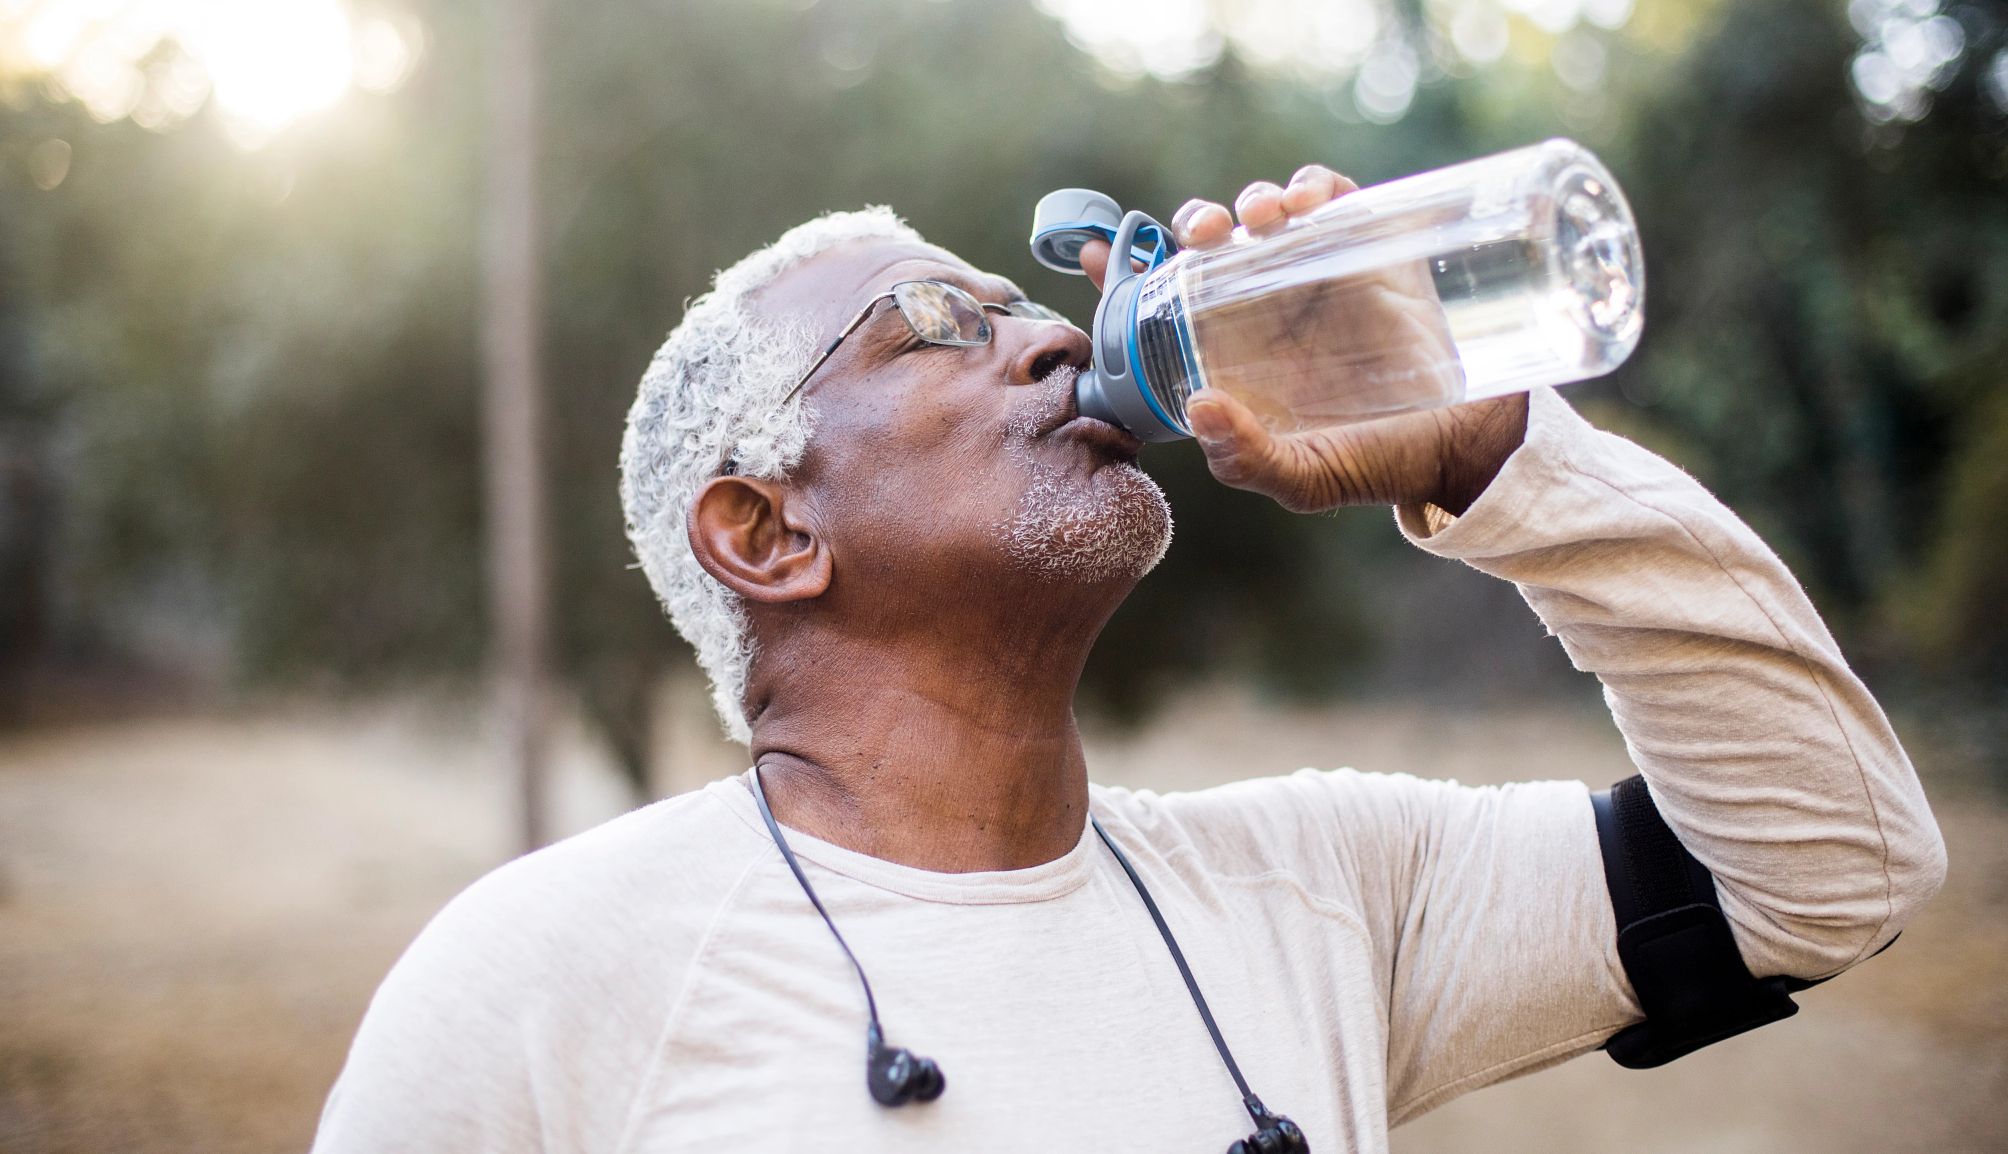 a man wearing headphones around his neck takes a drink from a clear plastic water bottle